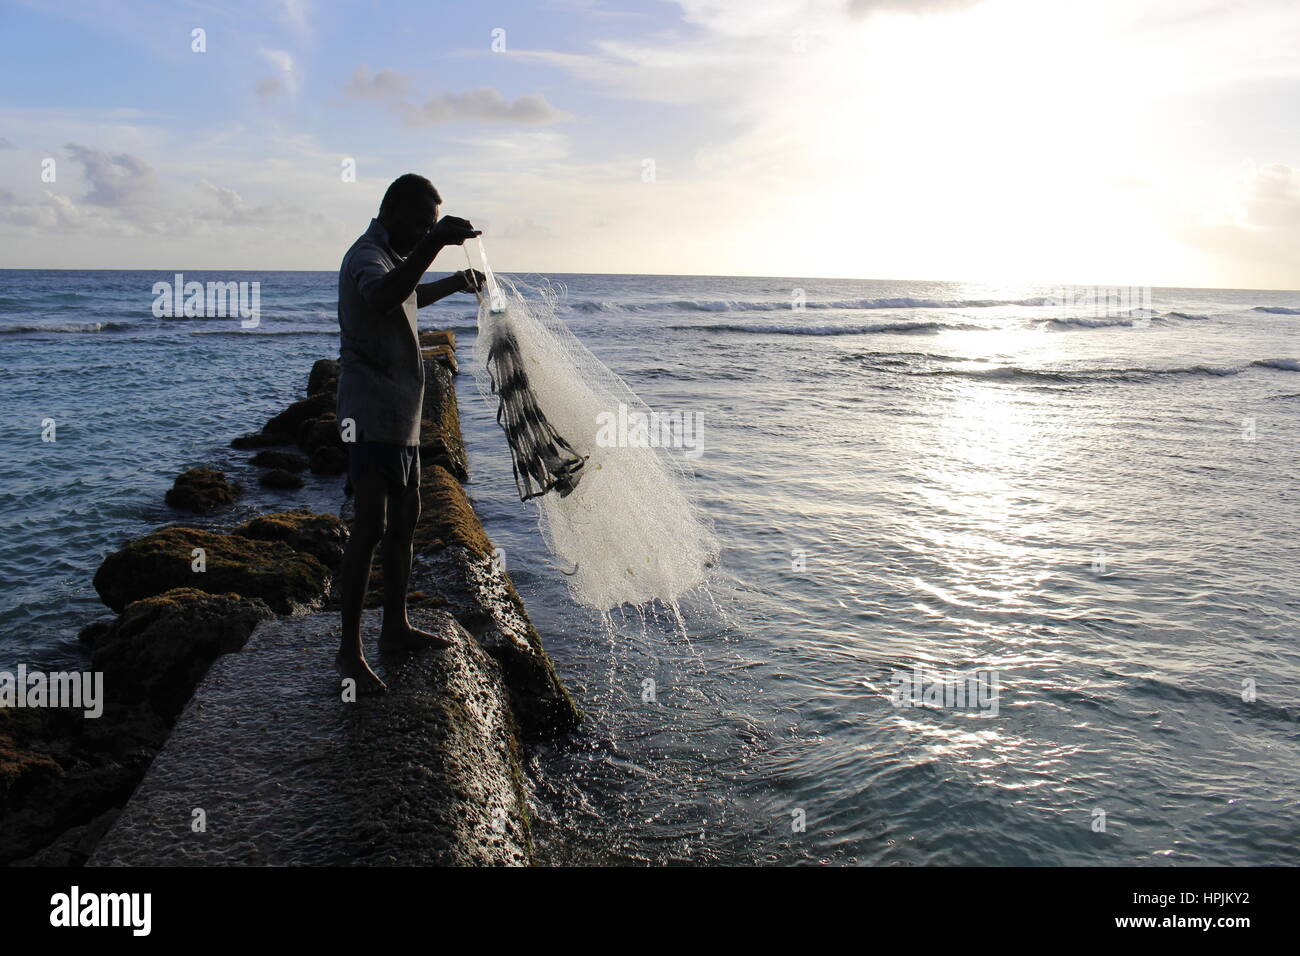 Fisherman casting his net in the sea, Hastings, Barbados